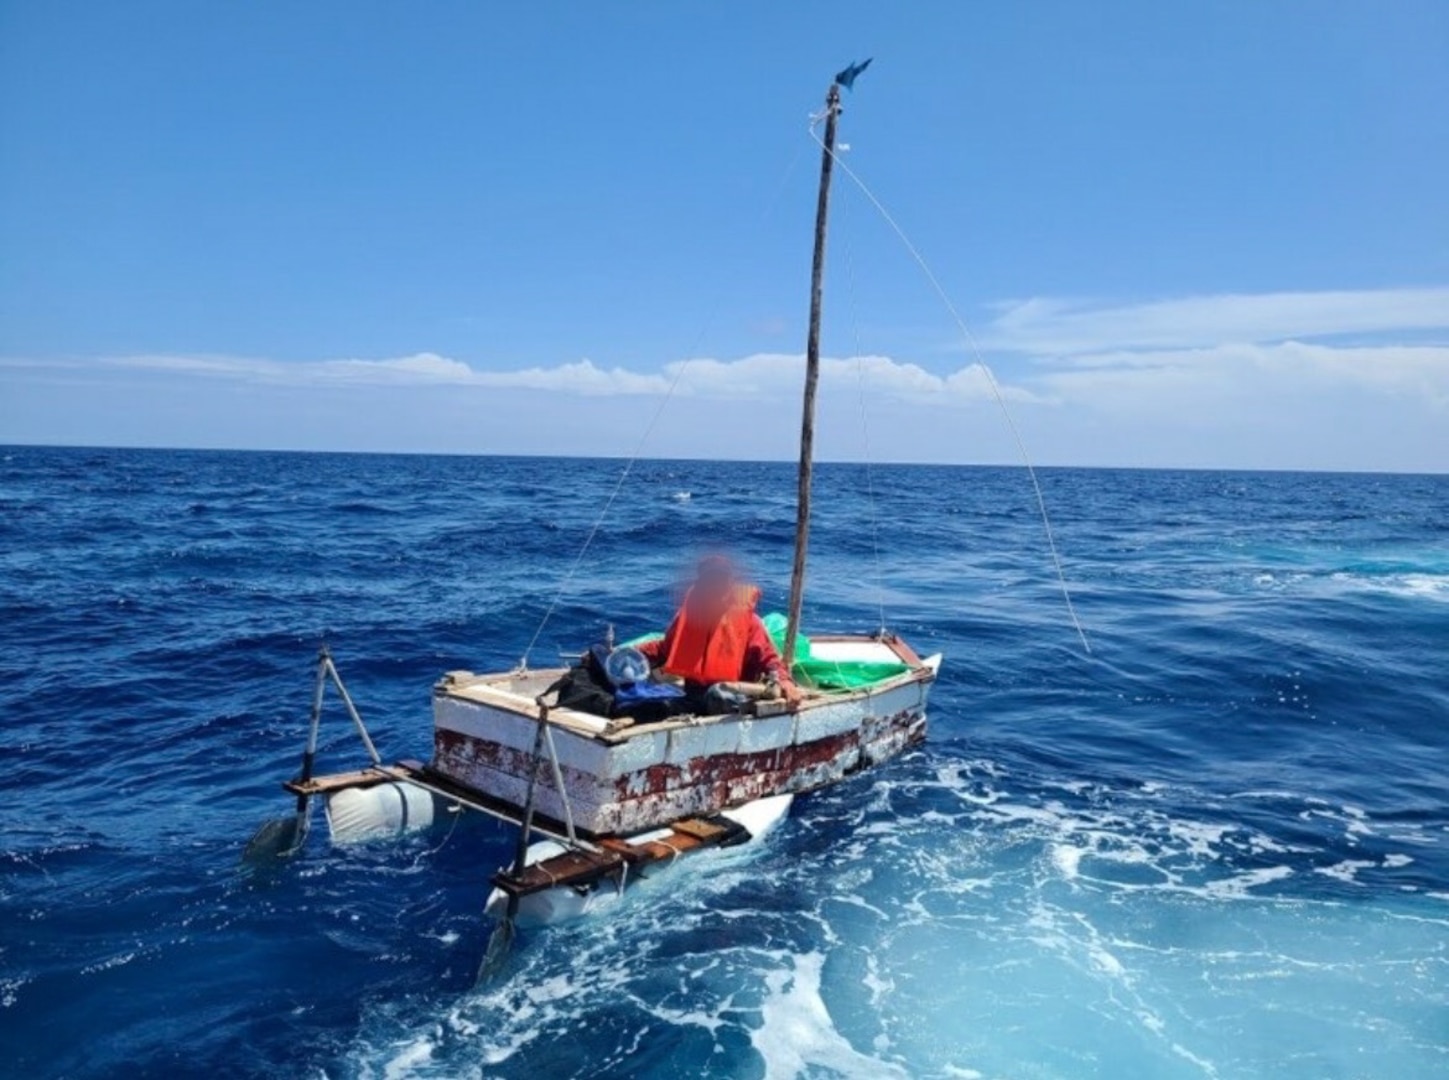 A migrant in a vessel making way near the Florida Keys.